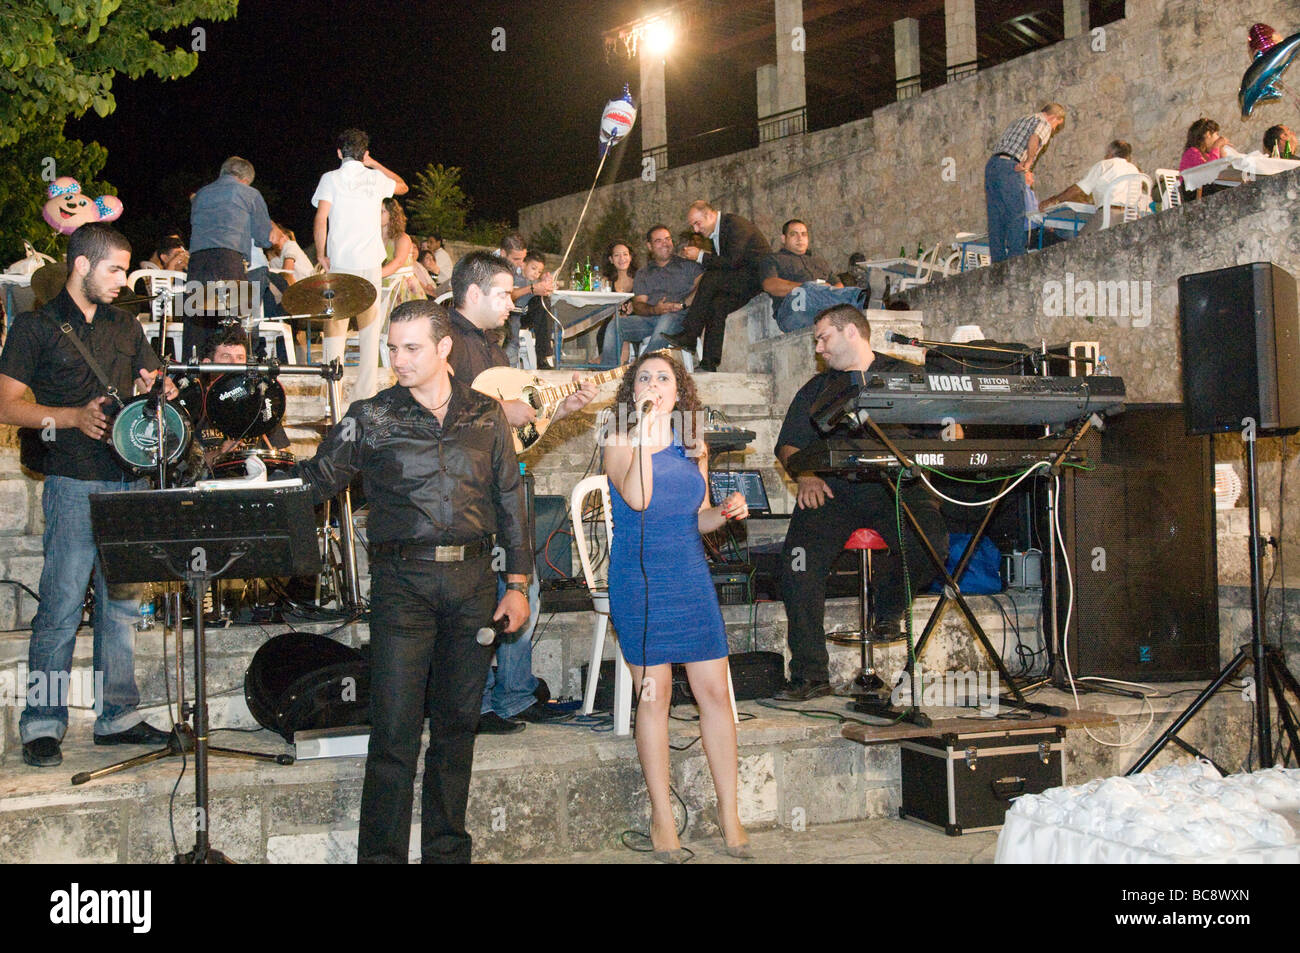 Cyprus Lysos A typical Cypriot Greek wedding in the town square Stock Photo